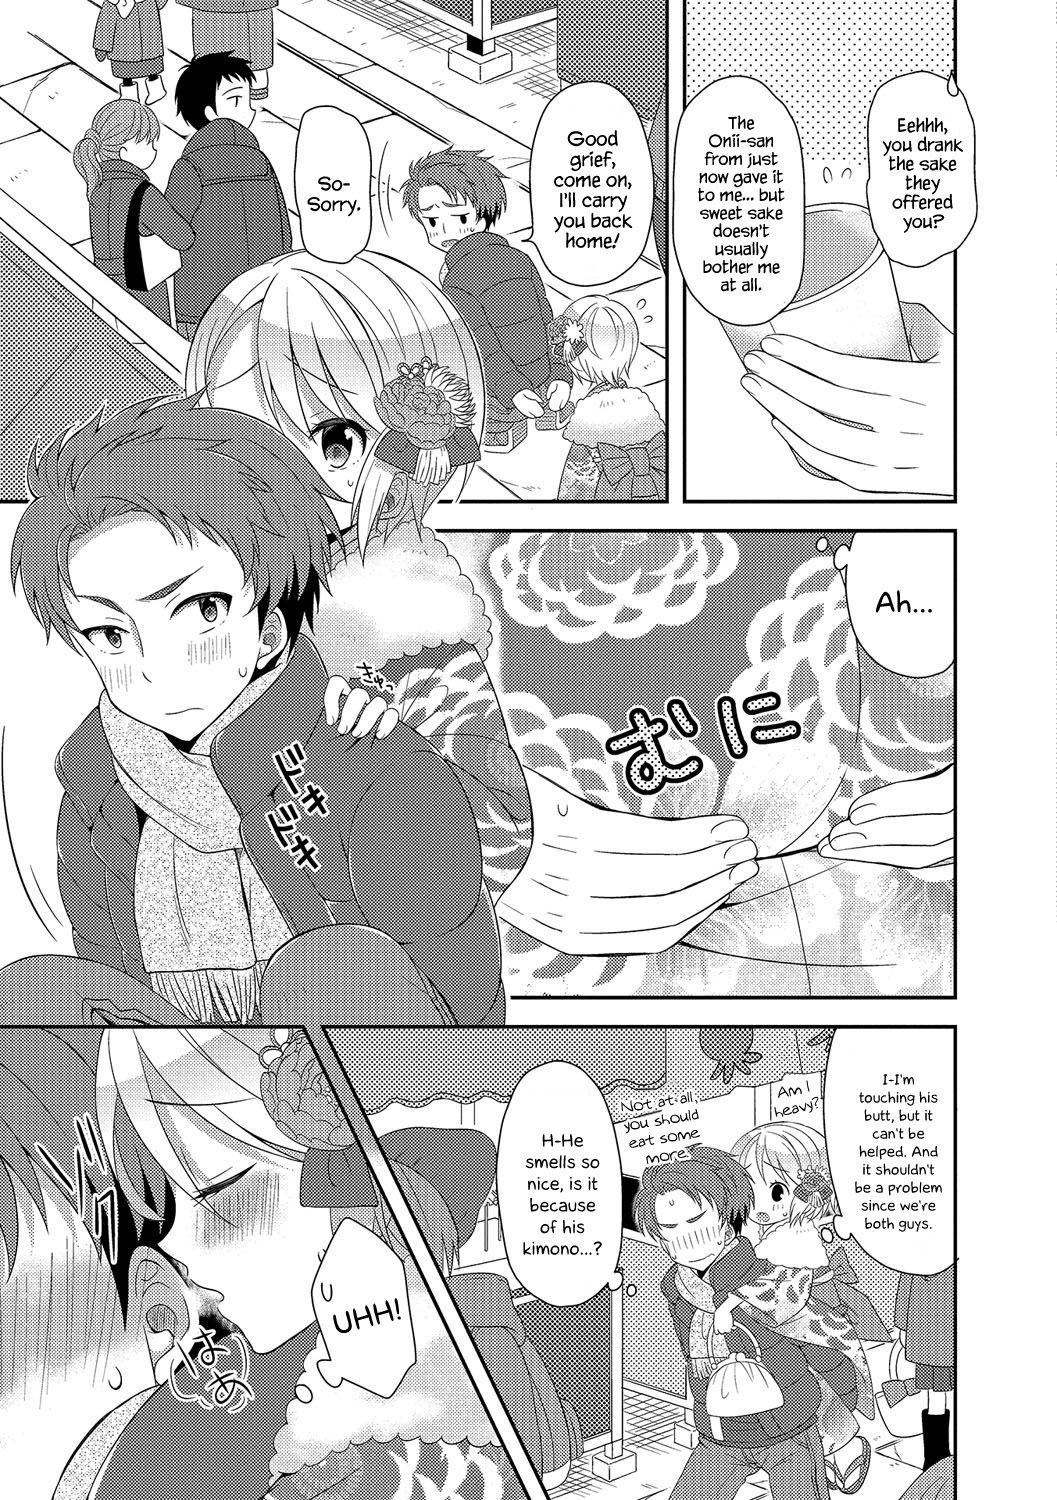 Swallowing Hatsumoude no Ohimesama | The Princess of the New Year Visit Butt Sex - Page 3